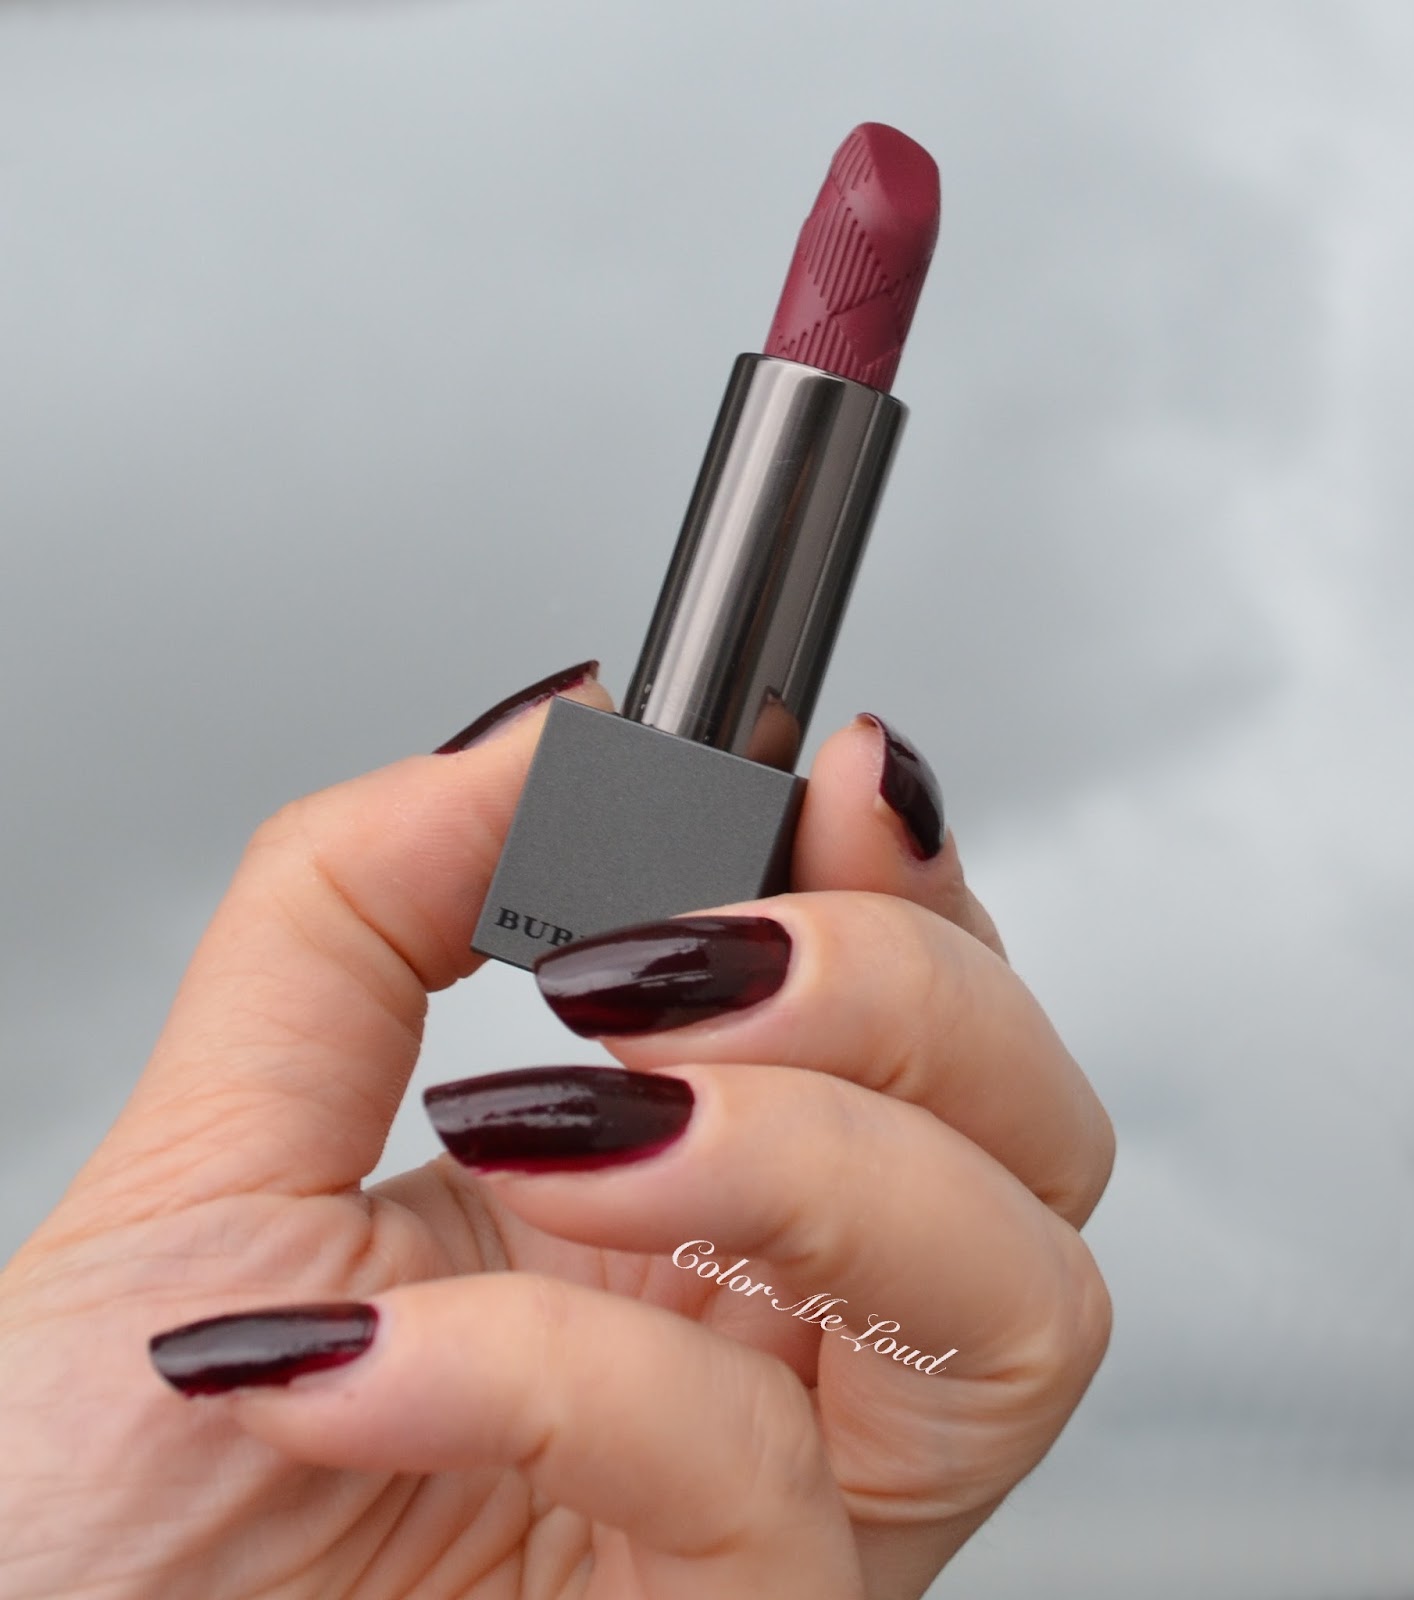 Burberry Nail Polish #440 Optic White, #304 Black Cherry for Spring/Summer  2016 Runway, Review, Swatch & Comparisons